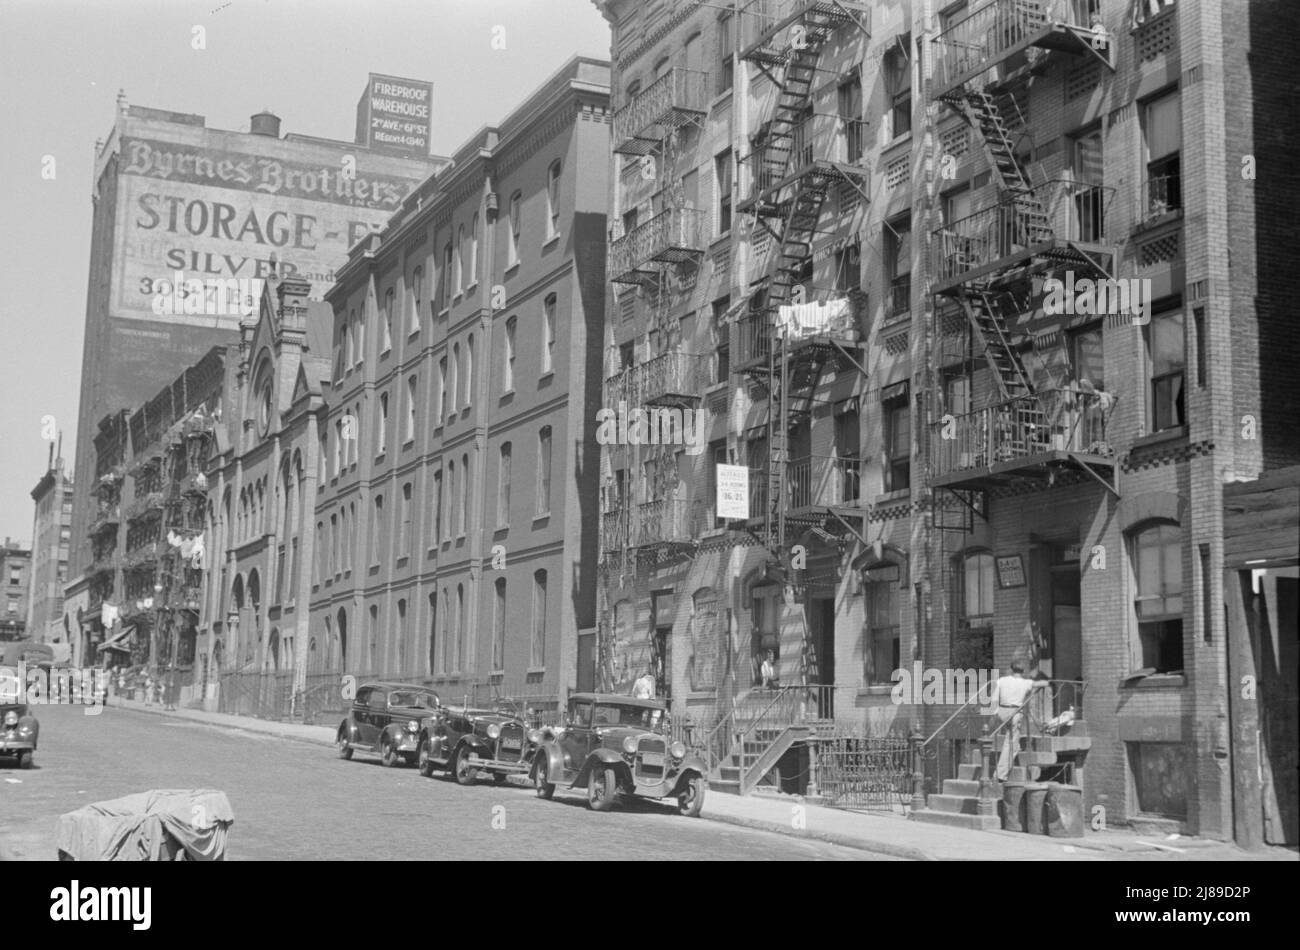 New York, New York. 61st Street between 1st and 3rd Avenues. House fronts. Stock Photo